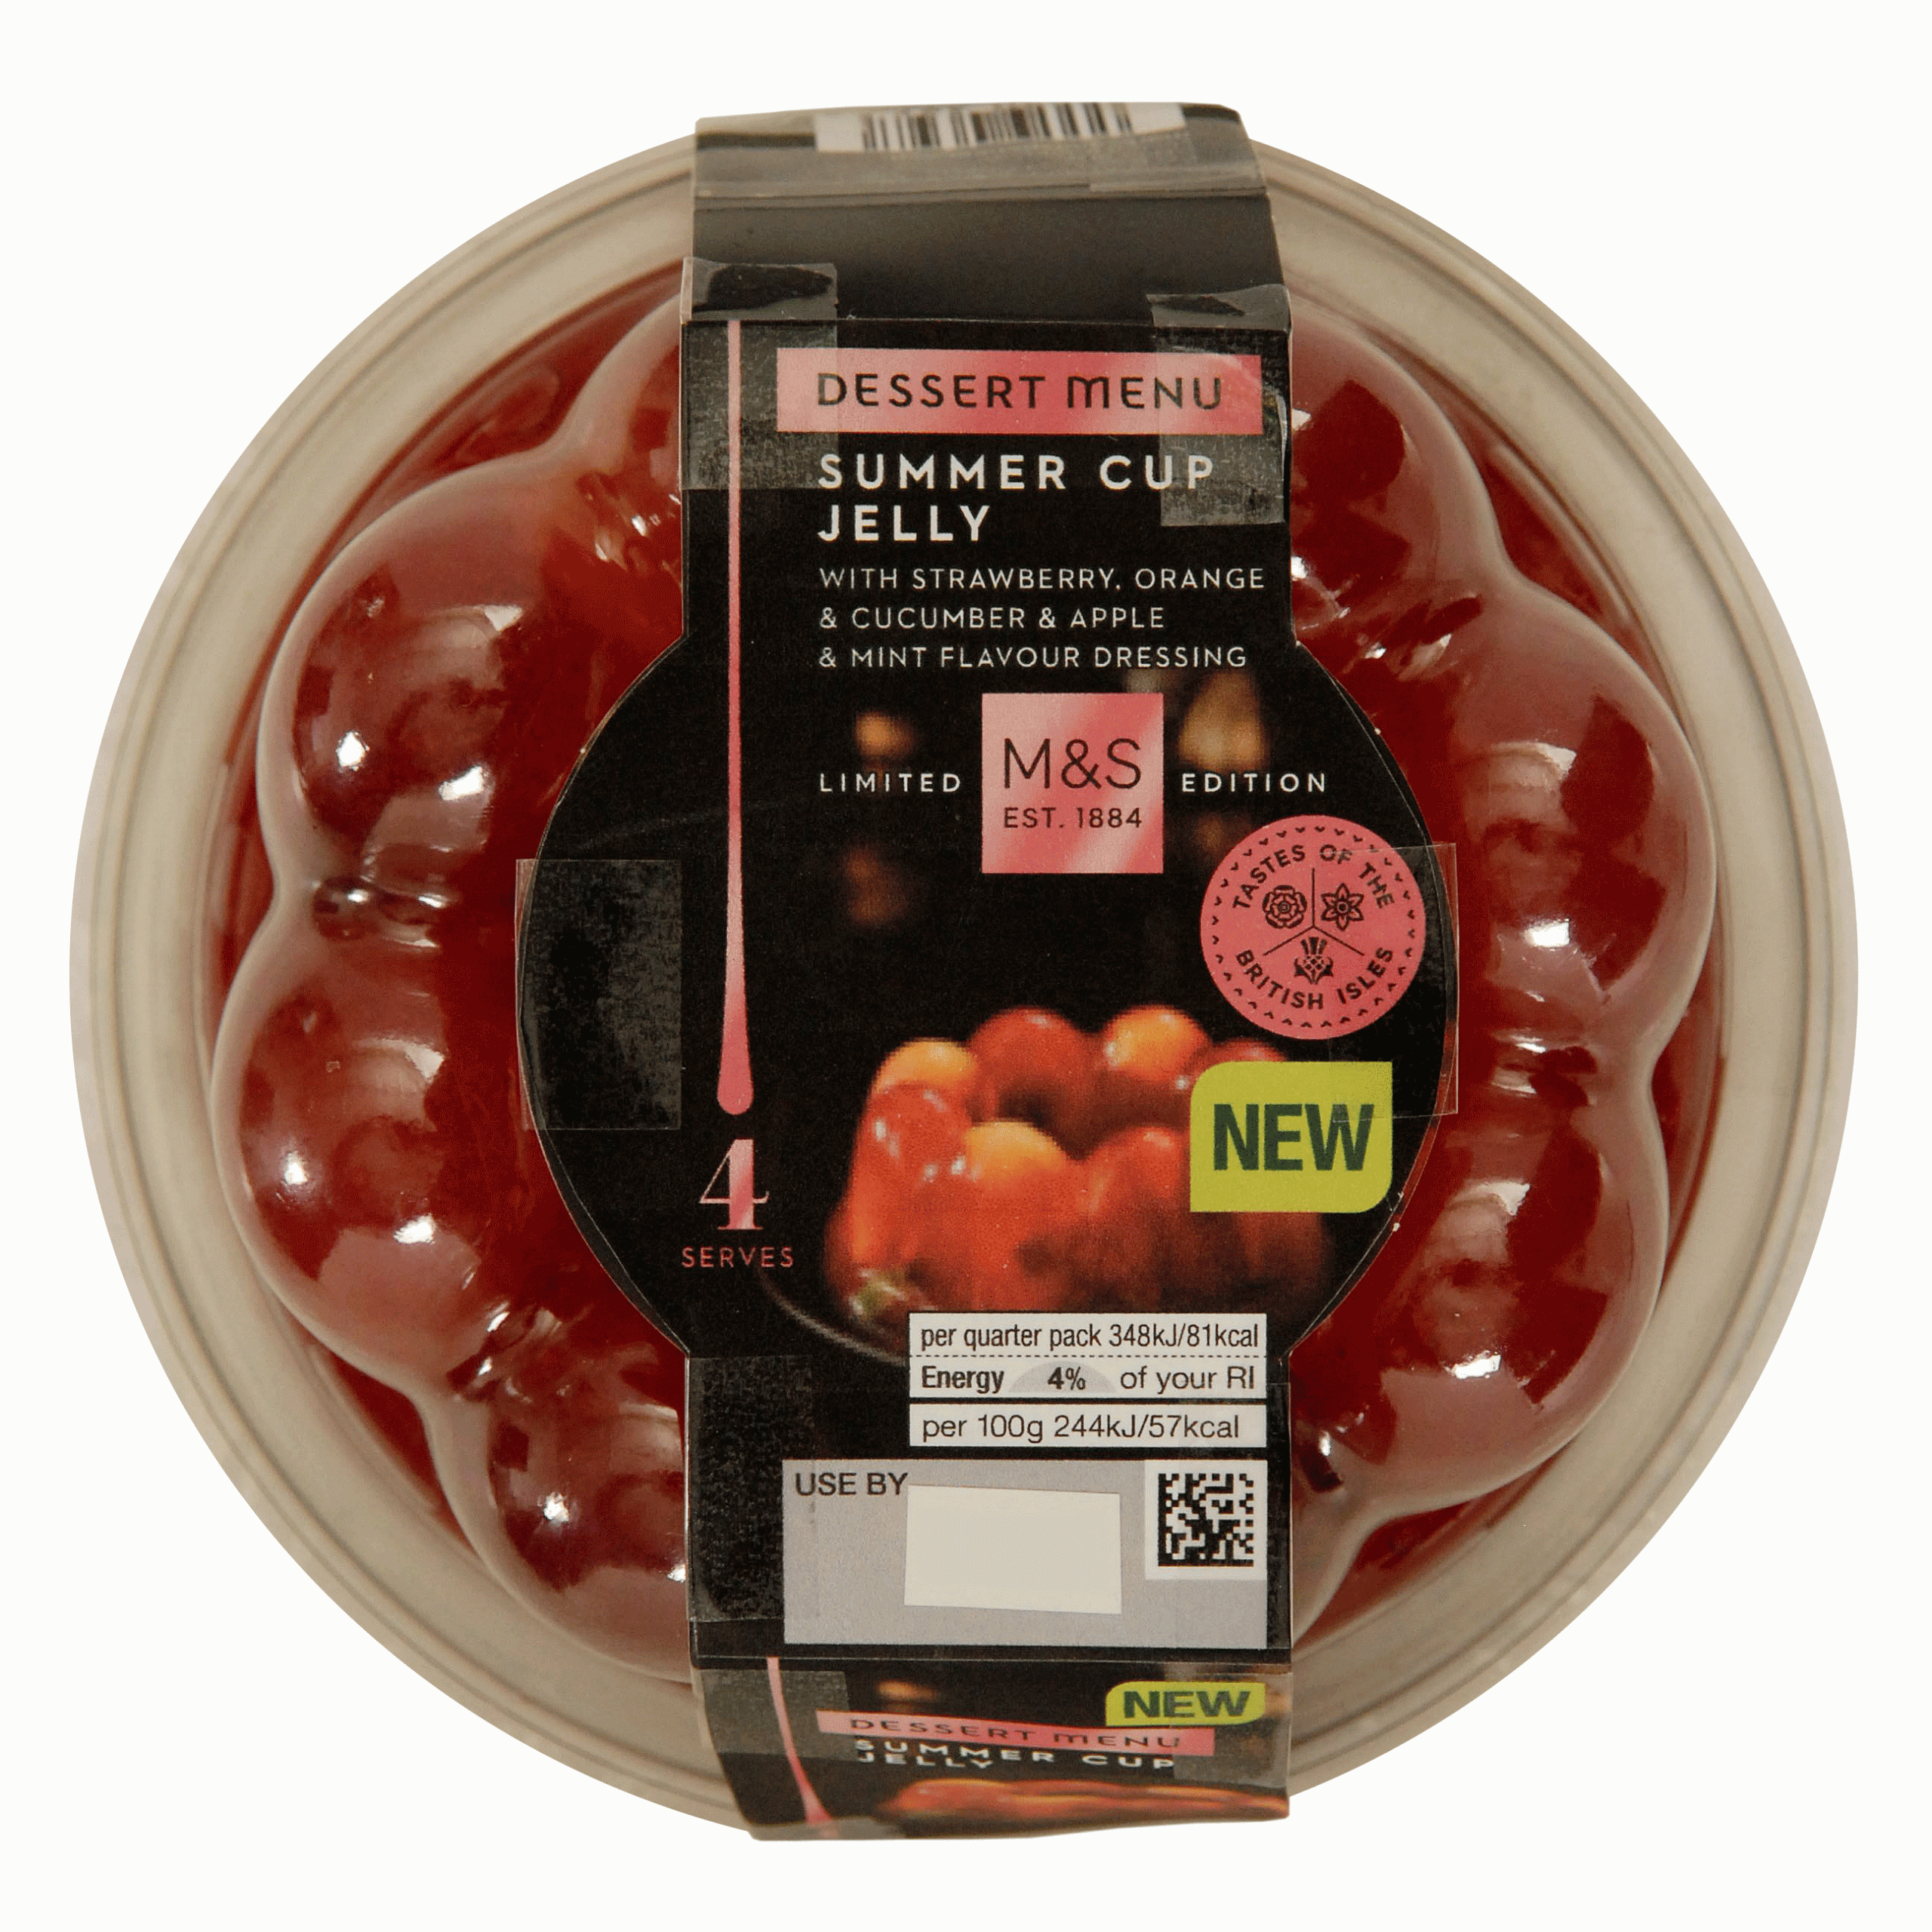 M&S's Summer Cup Jelly